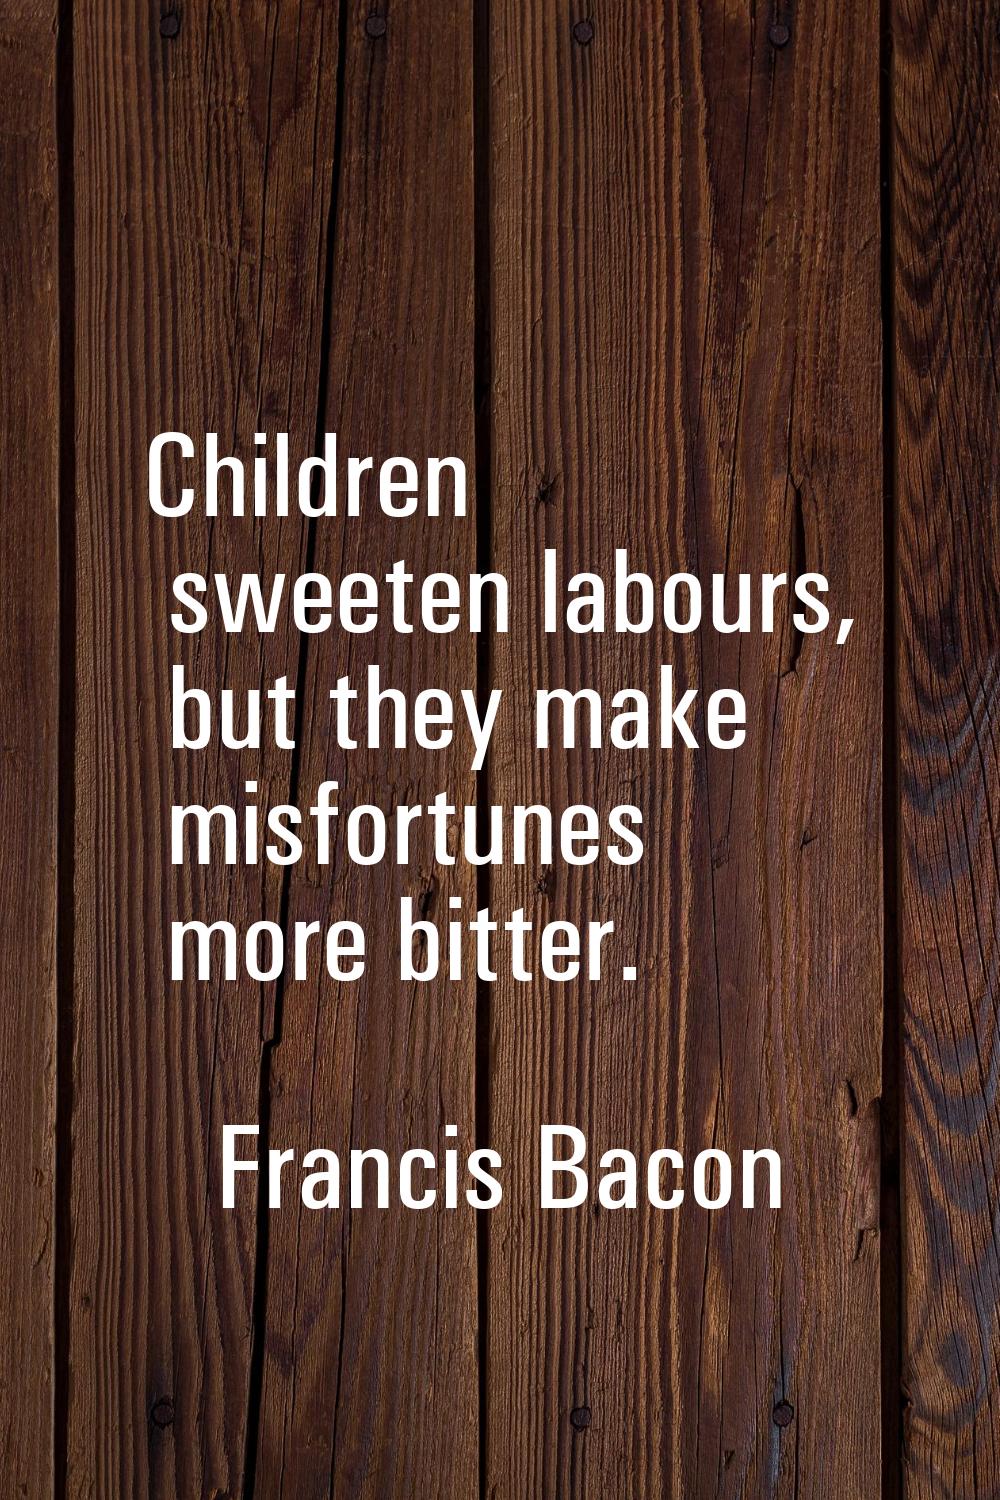 Children sweeten labours, but they make misfortunes more bitter.